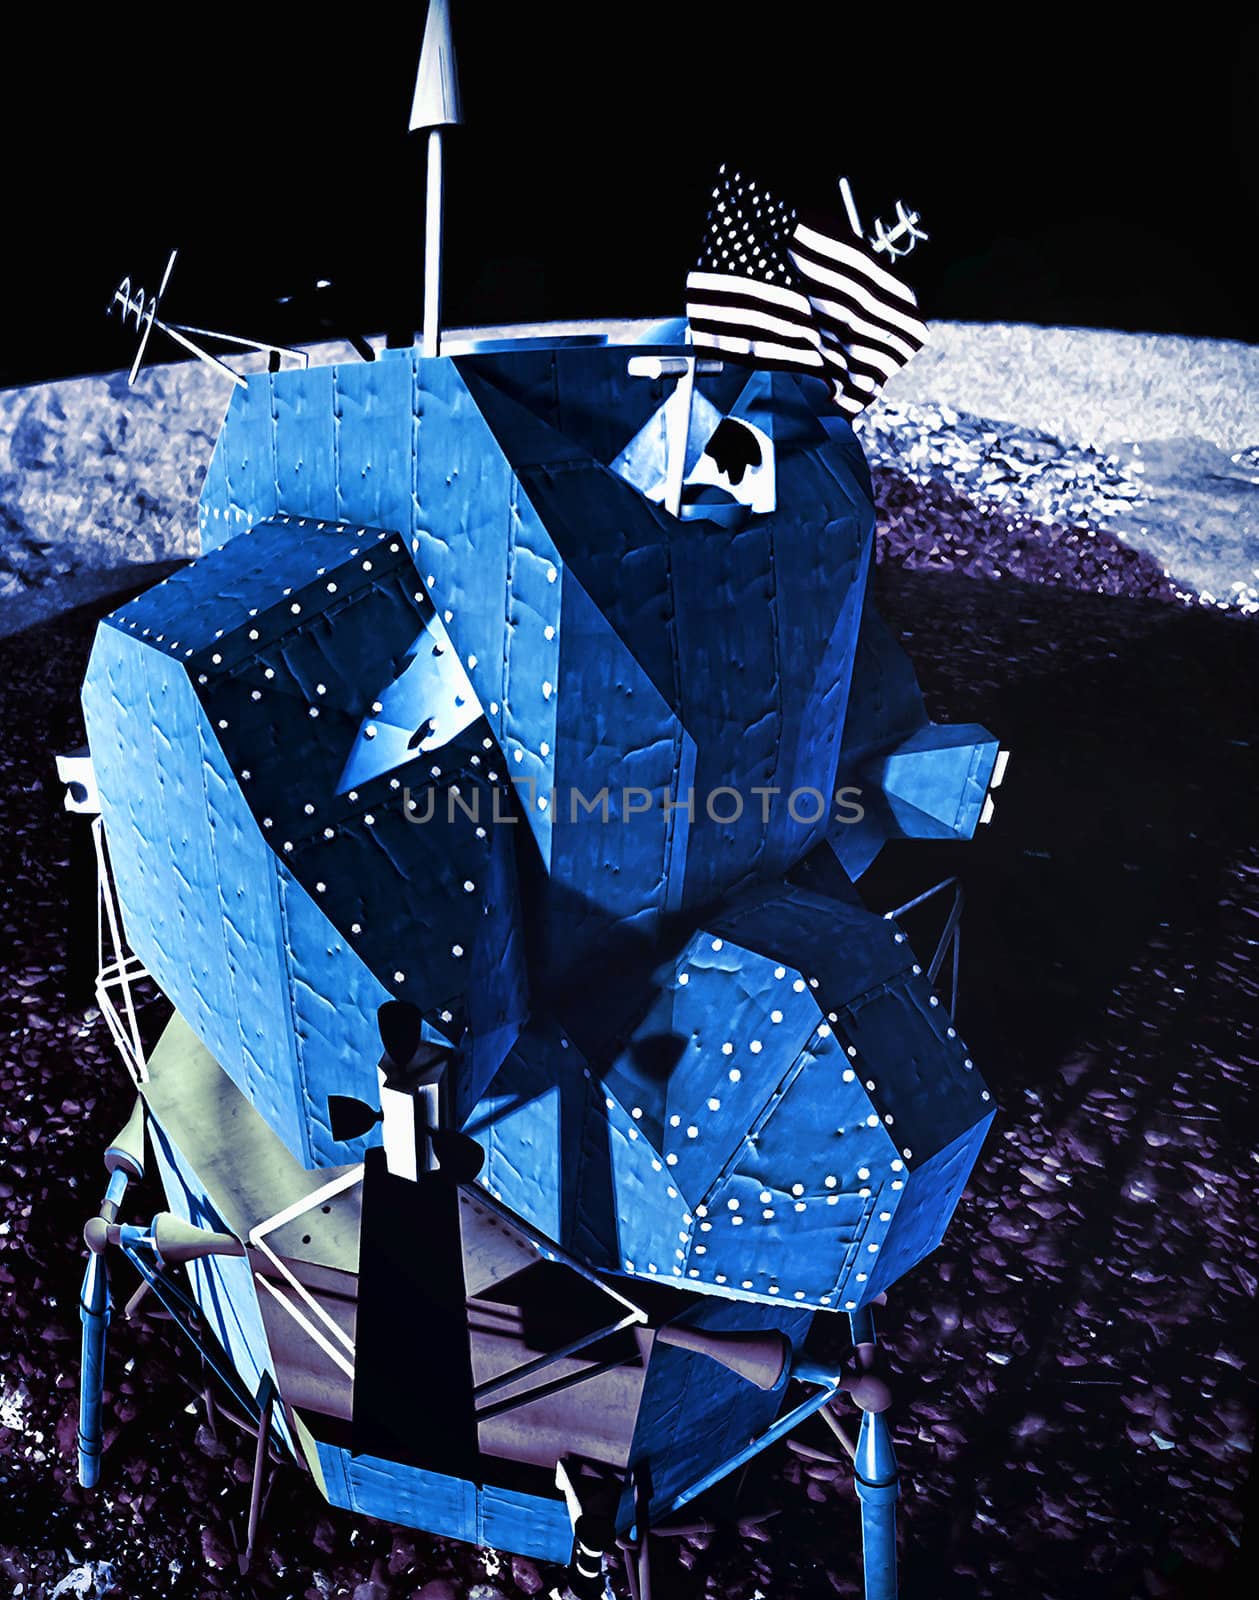 Moon rover on alien planet